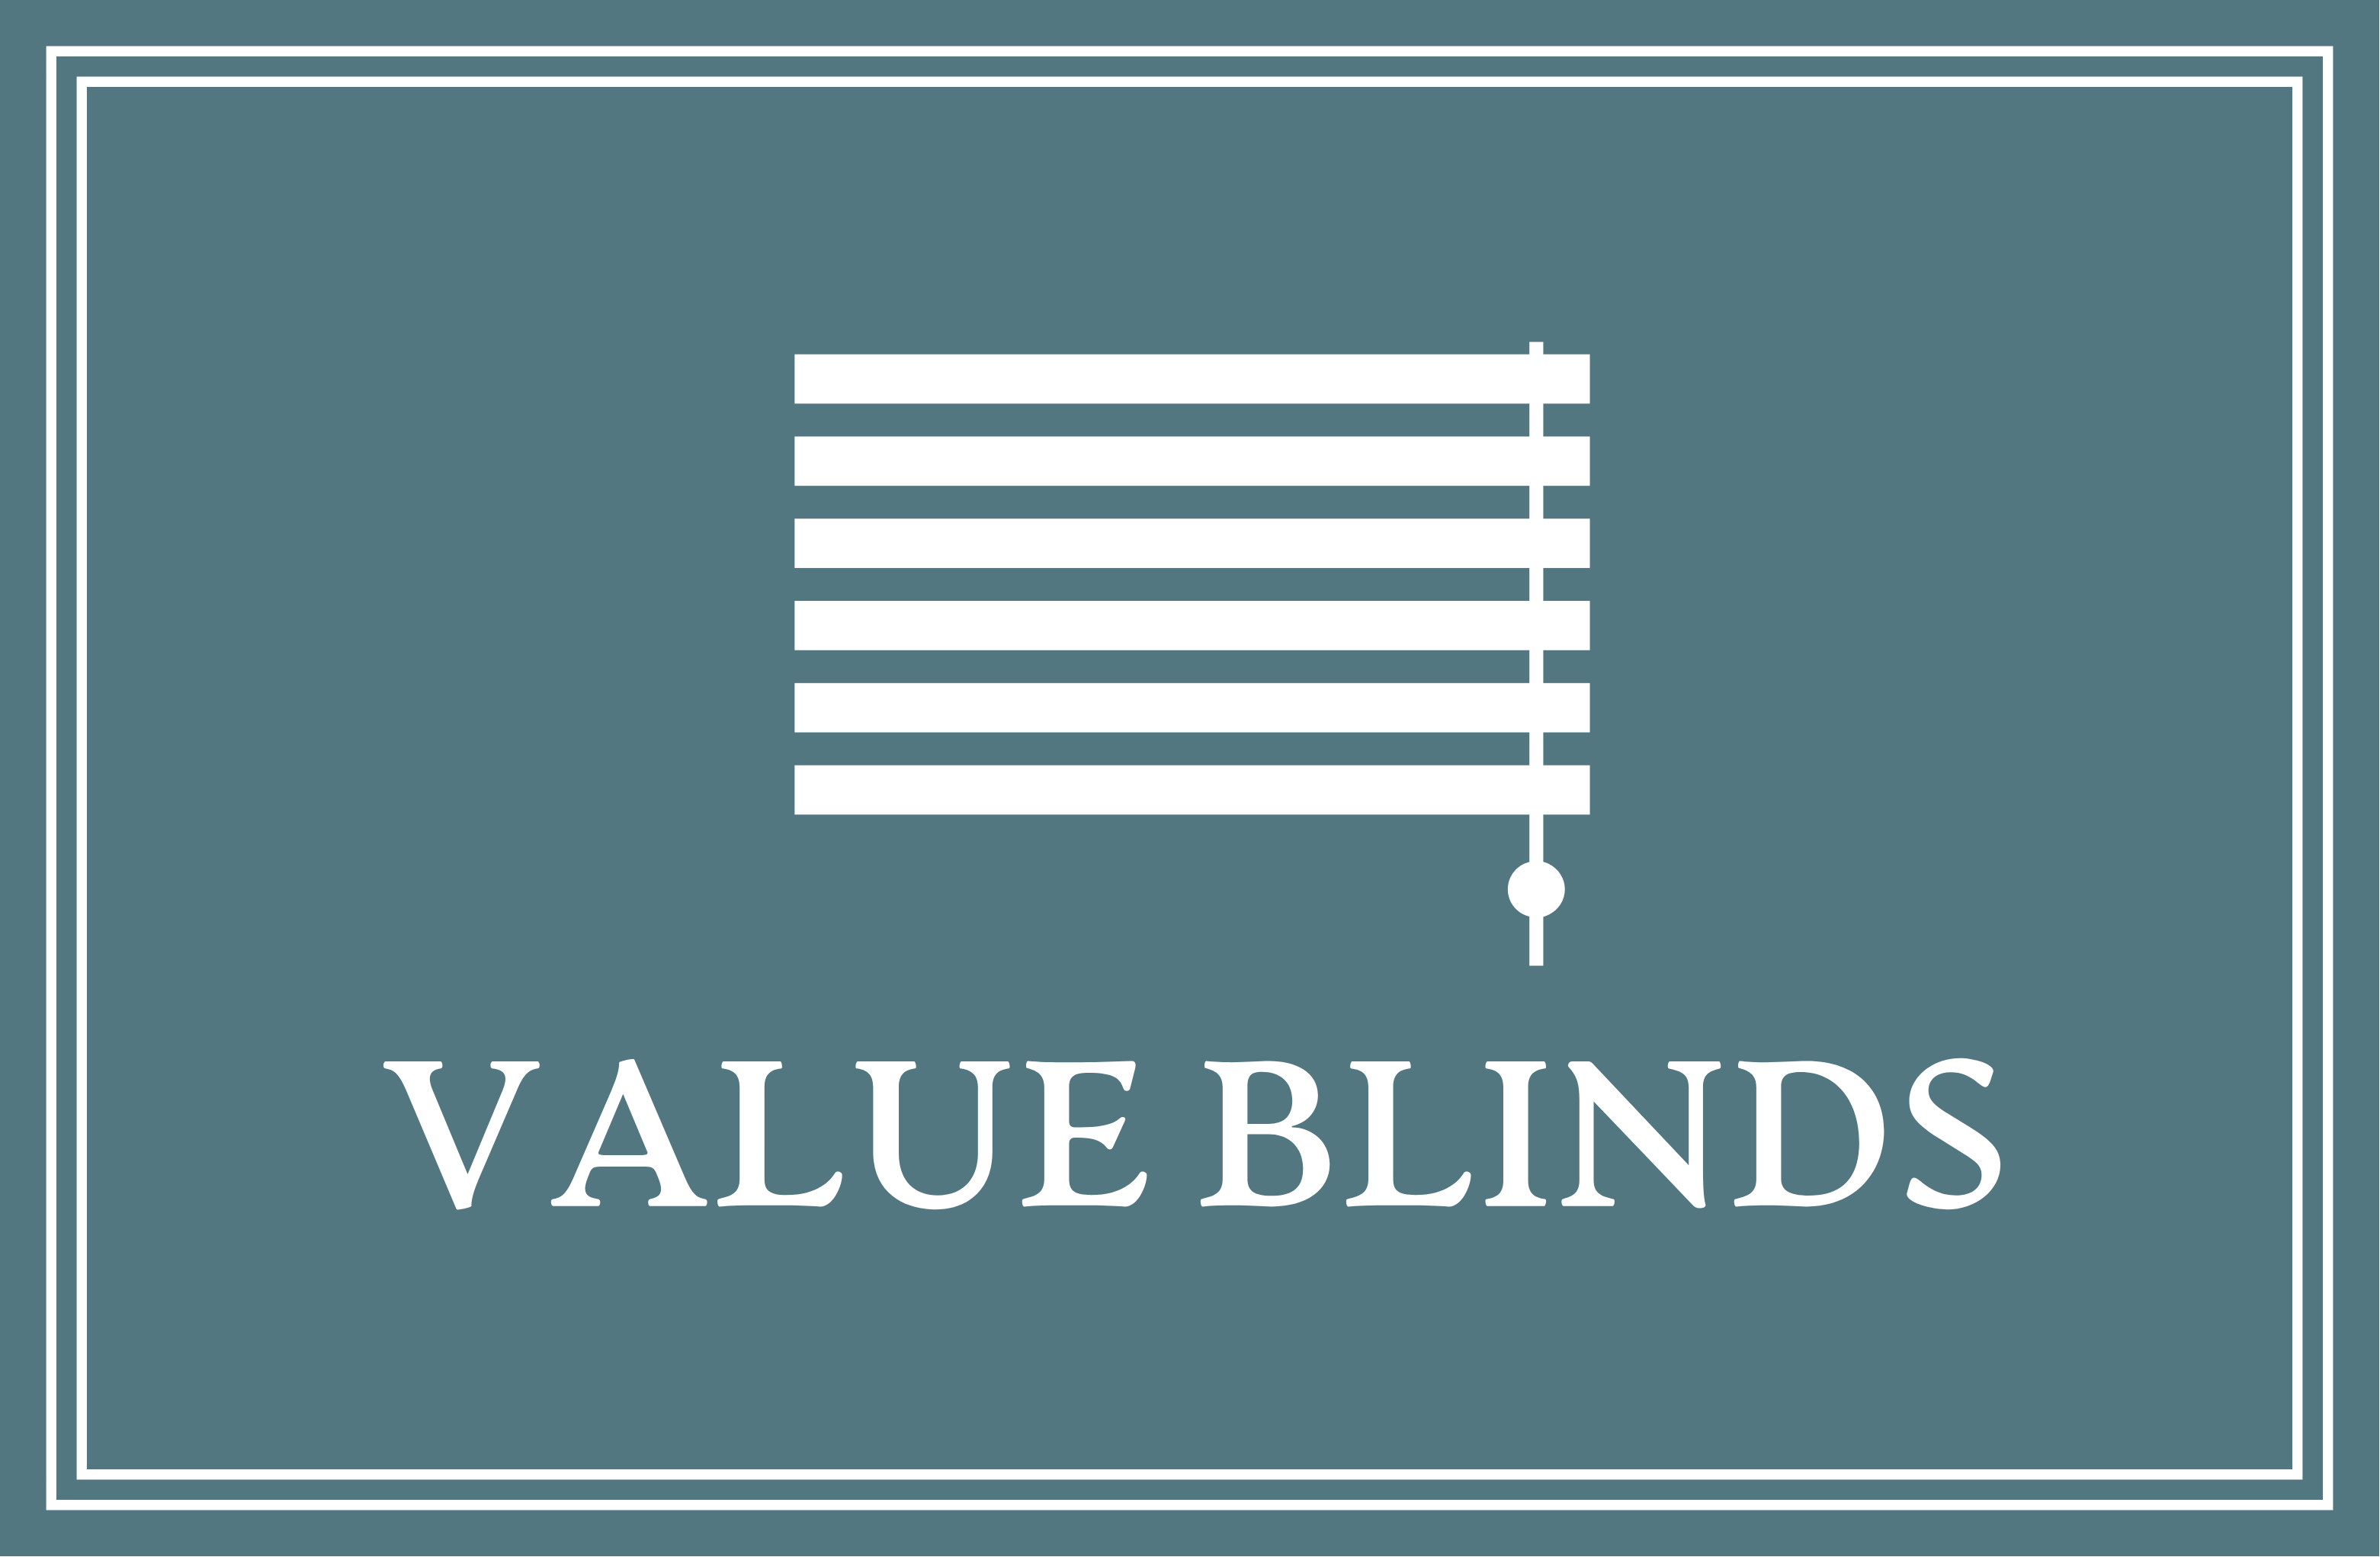 Value Blinds Company